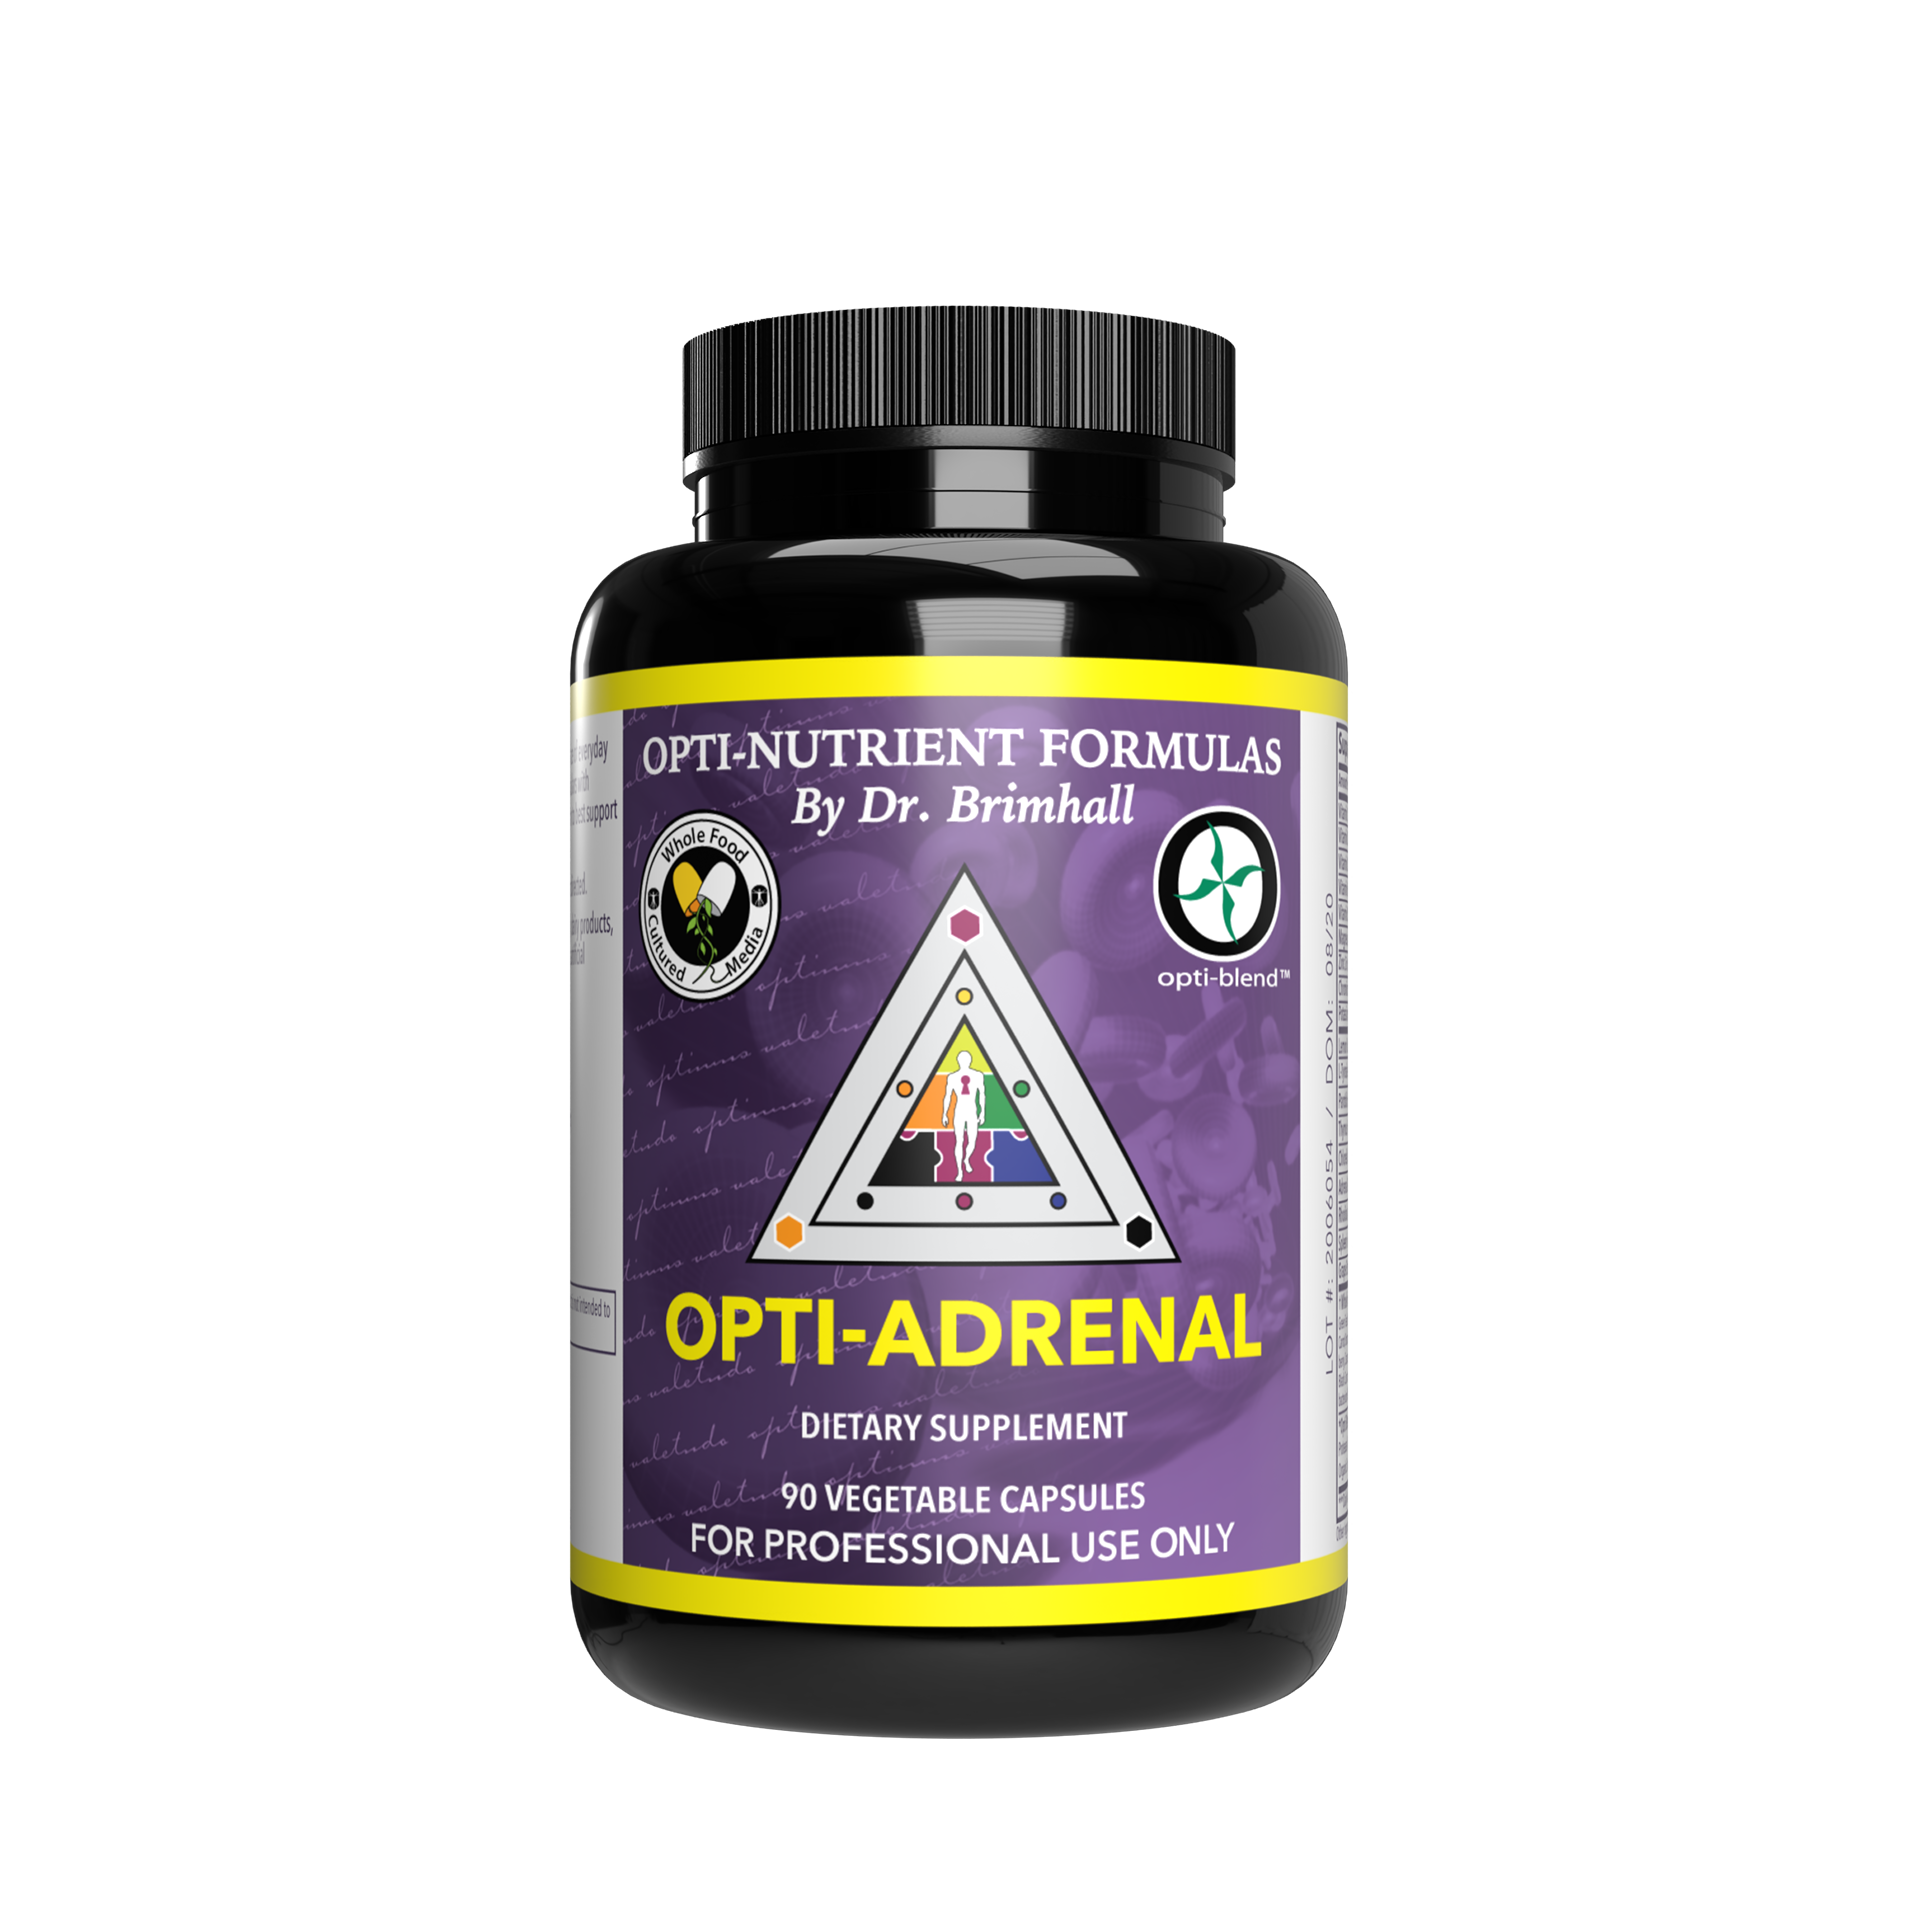 Image of a bottle of Opti-Adrenal.